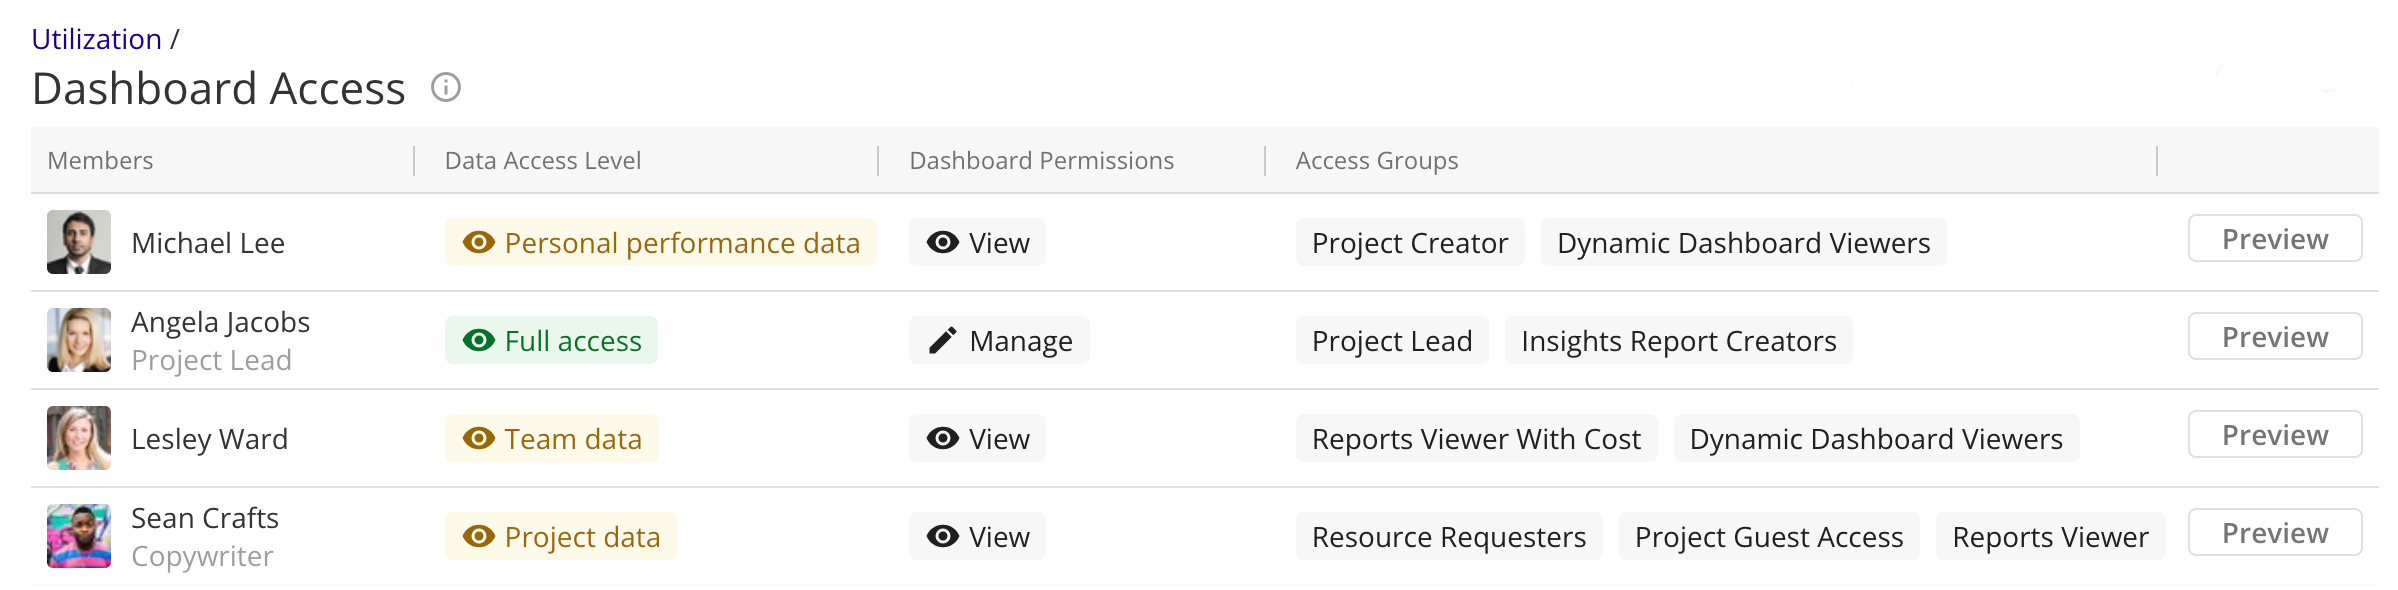 Utilization Dashboard Access Page.png